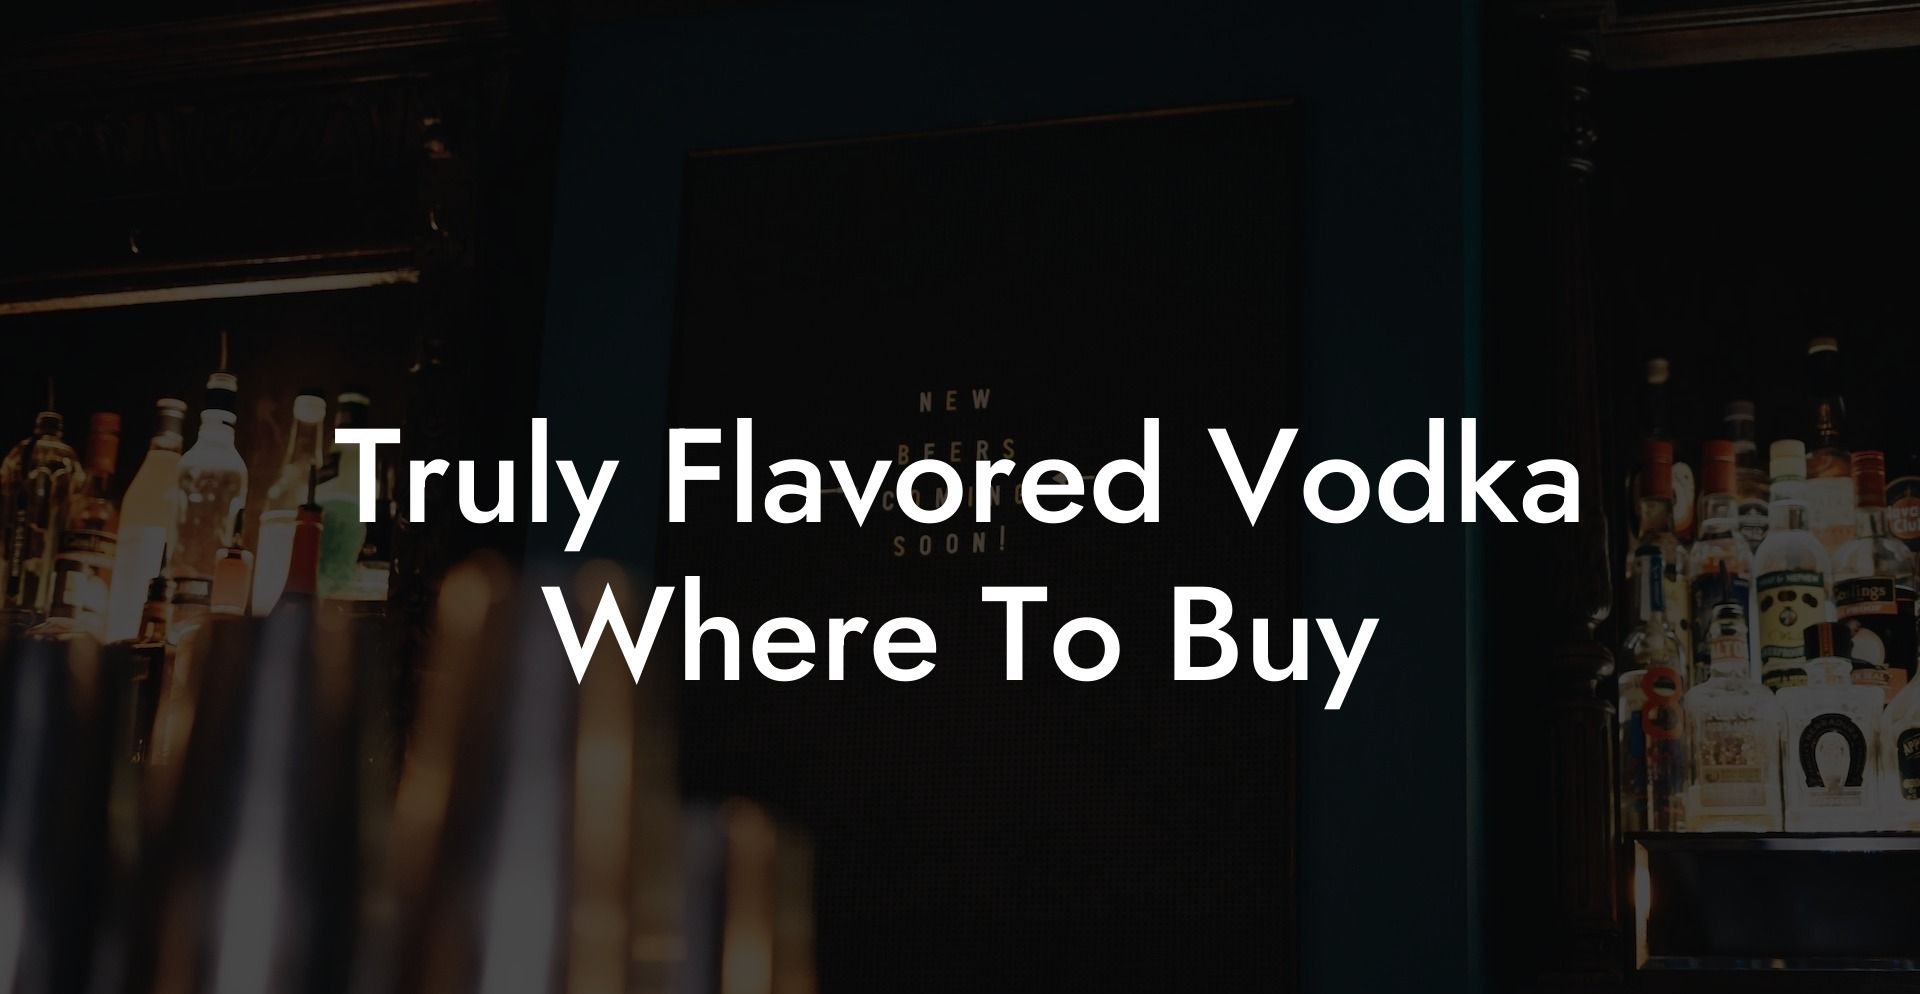 Truly Flavored Vodka Where To Buy